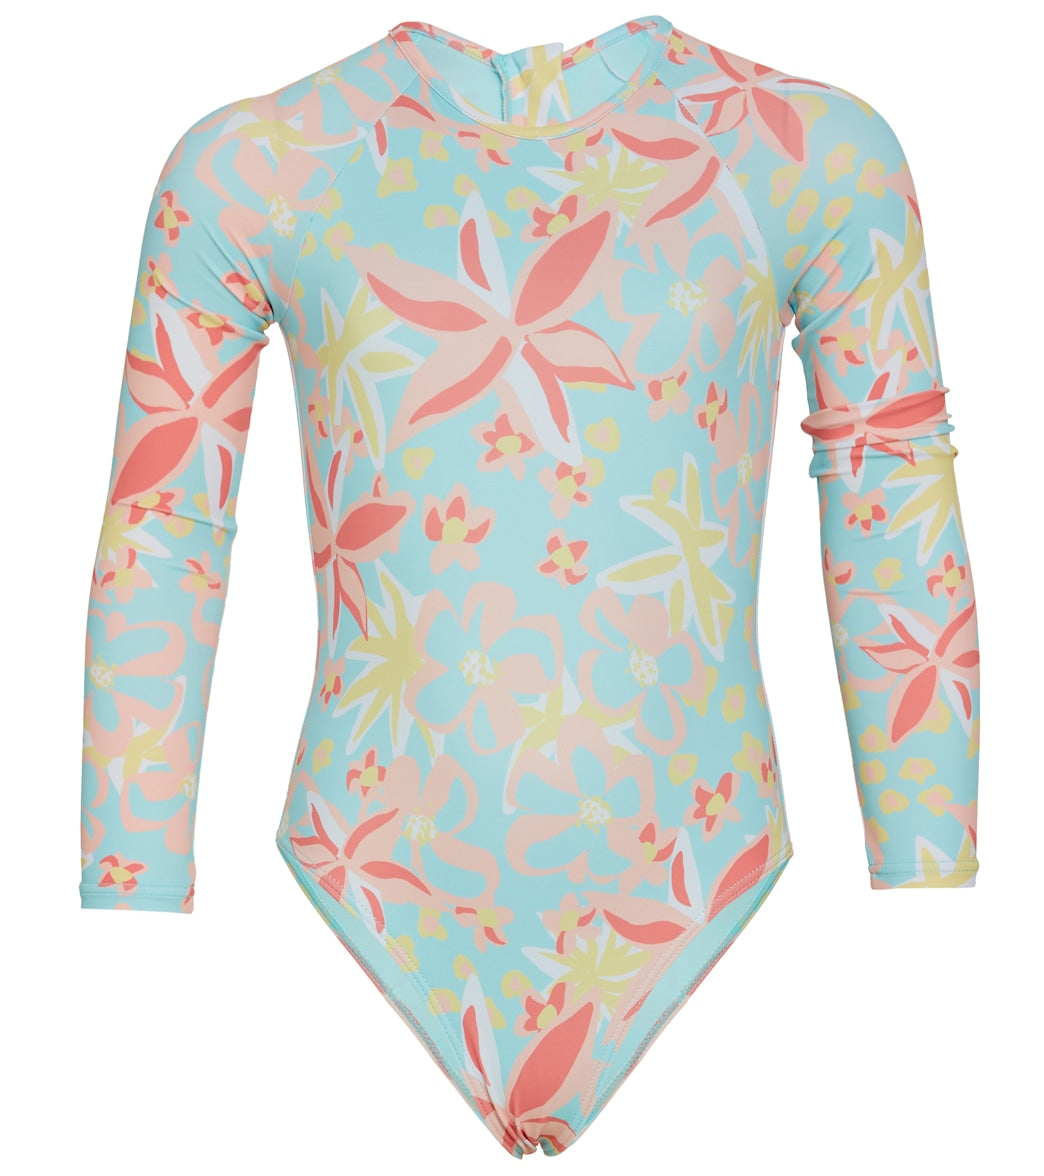 Roxy Girls Holiday Flower Long Sleeve One Piece Swimsuit (Toddler, Little Kid)